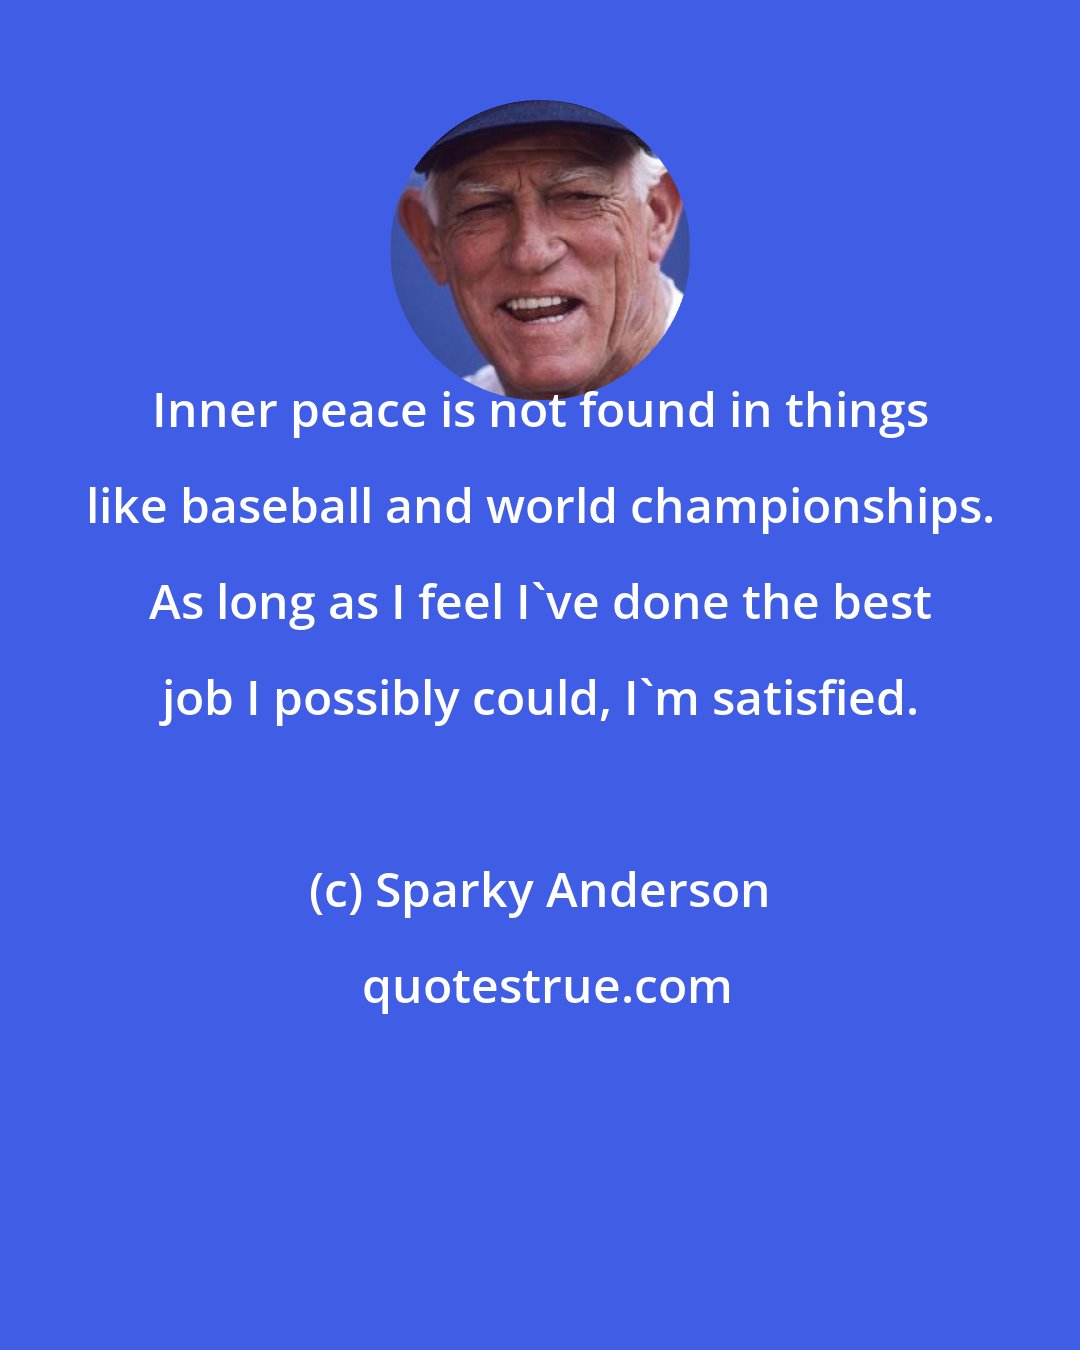 Sparky Anderson: Inner peace is not found in things like baseball and world championships. As long as I feel I've done the best job I possibly could, I'm satisfied.